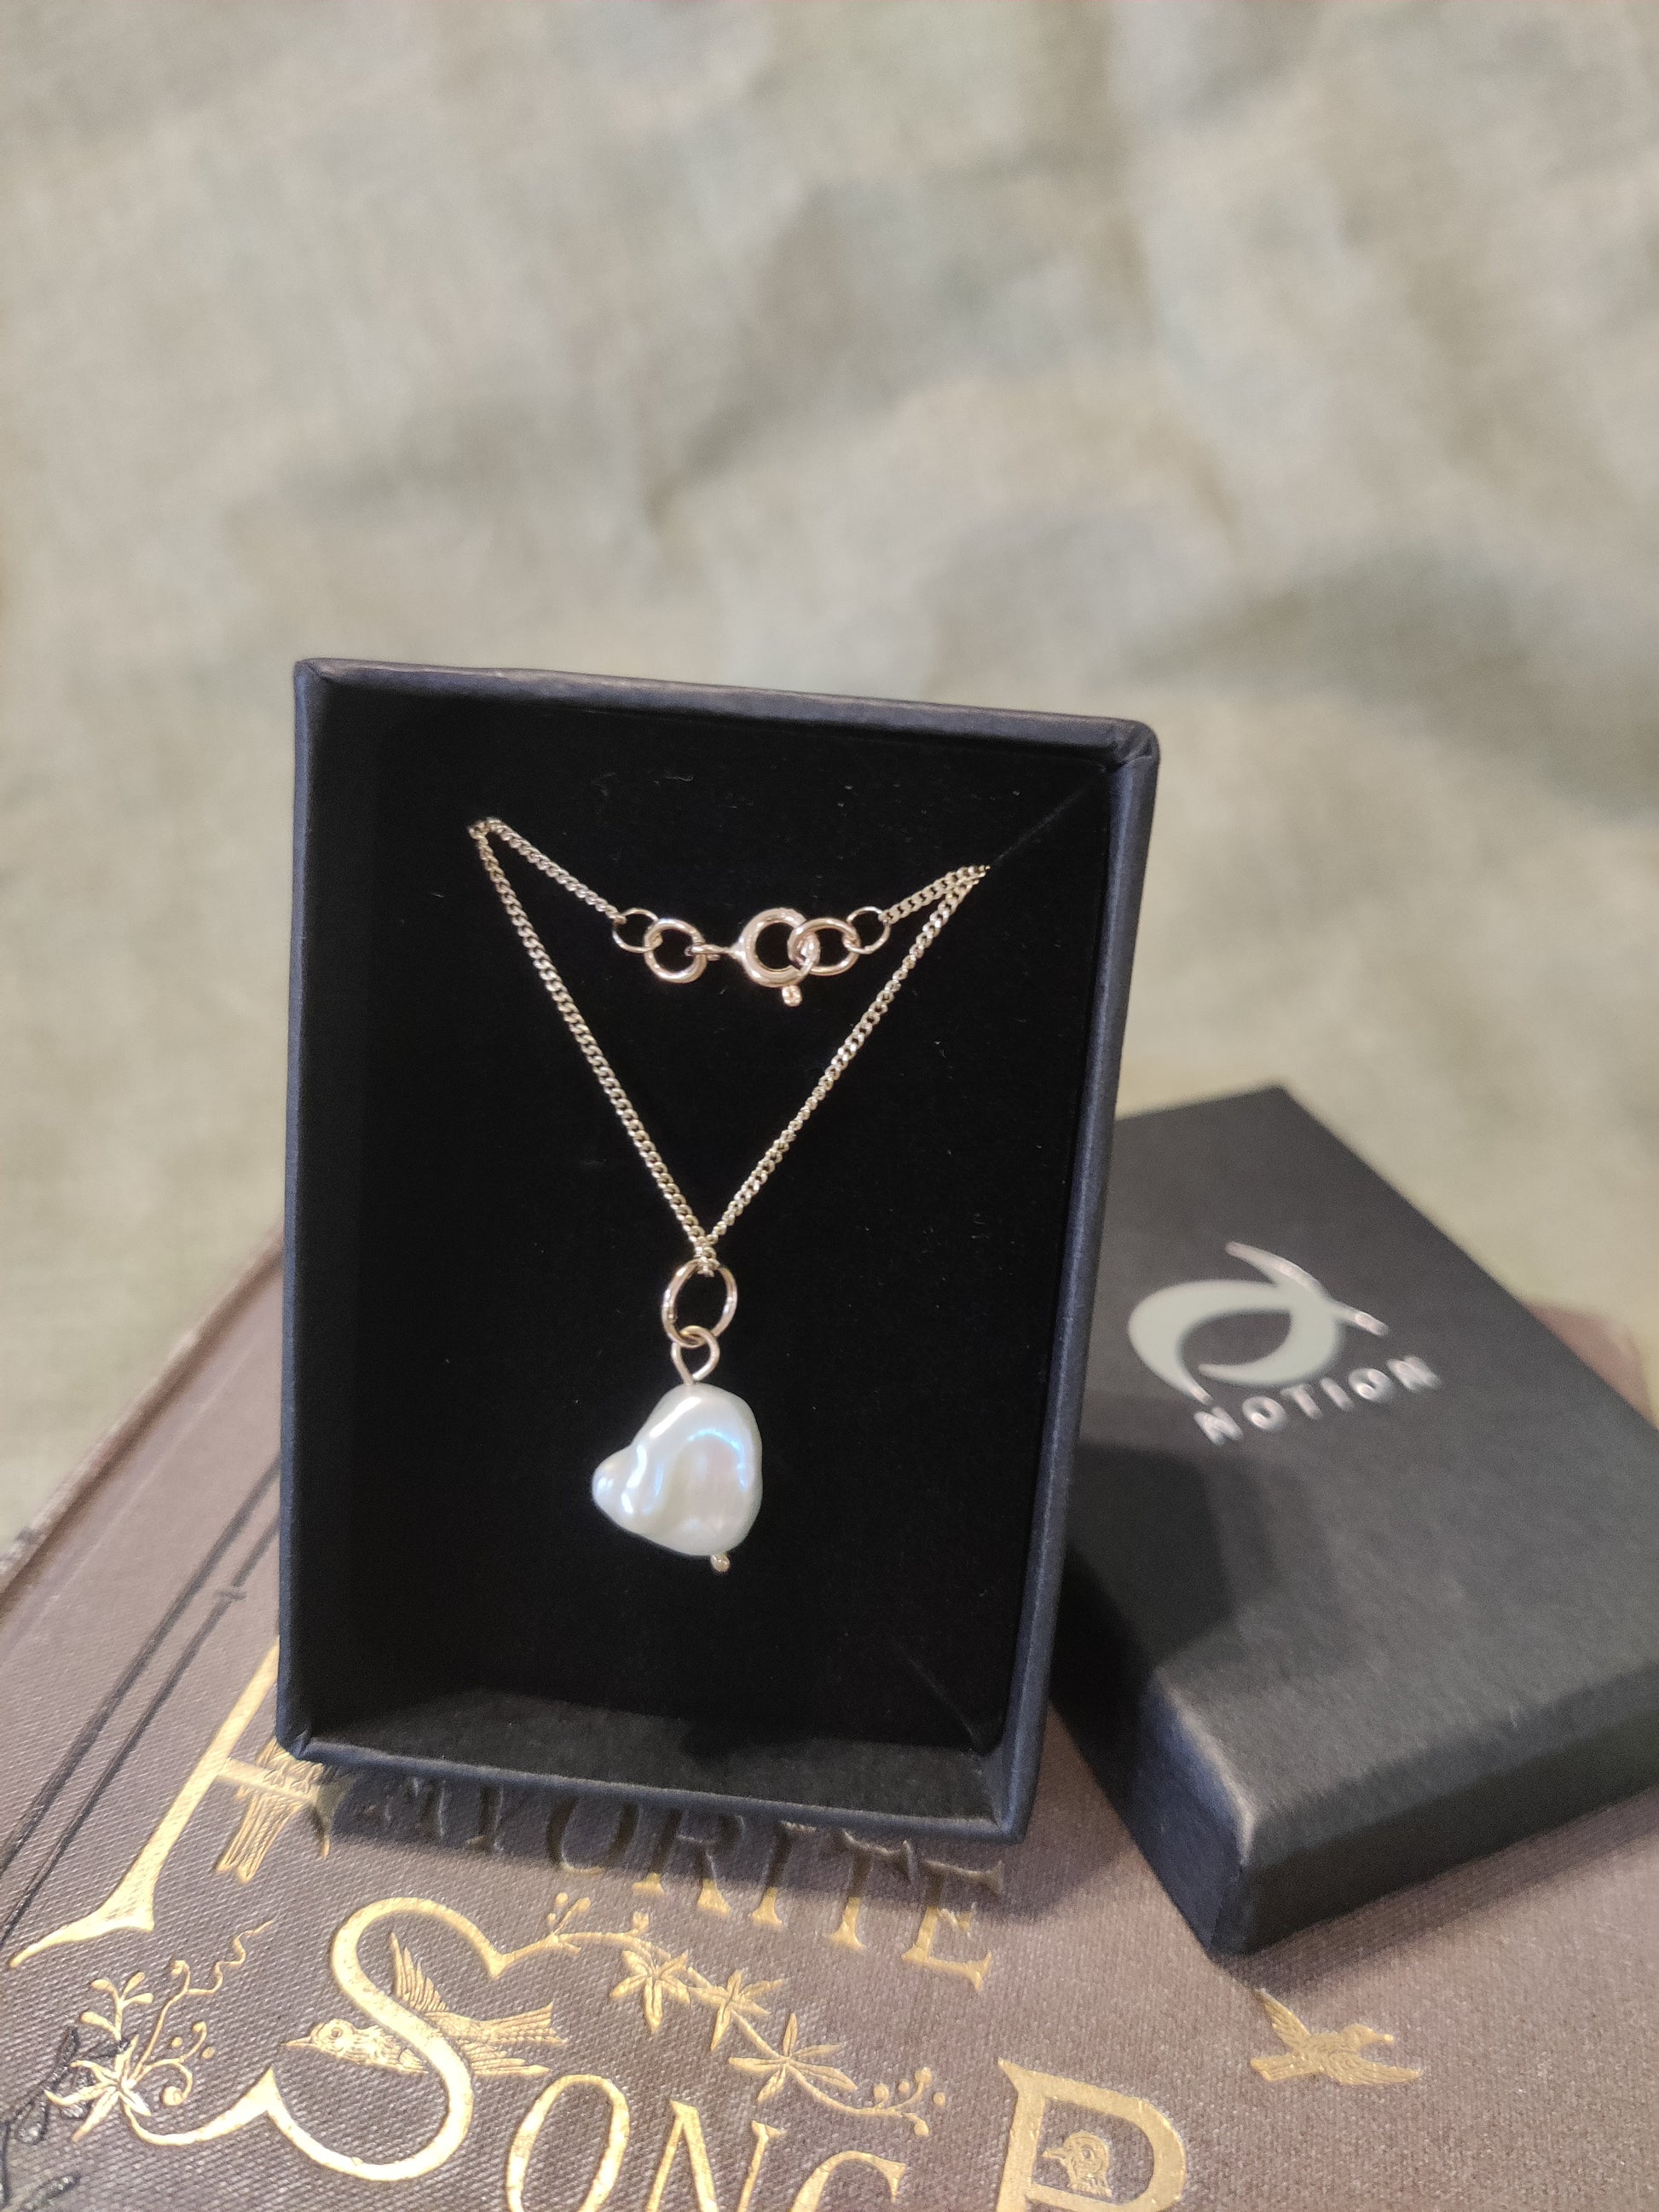 large pearl necklace by Notion Jewellery in gift box